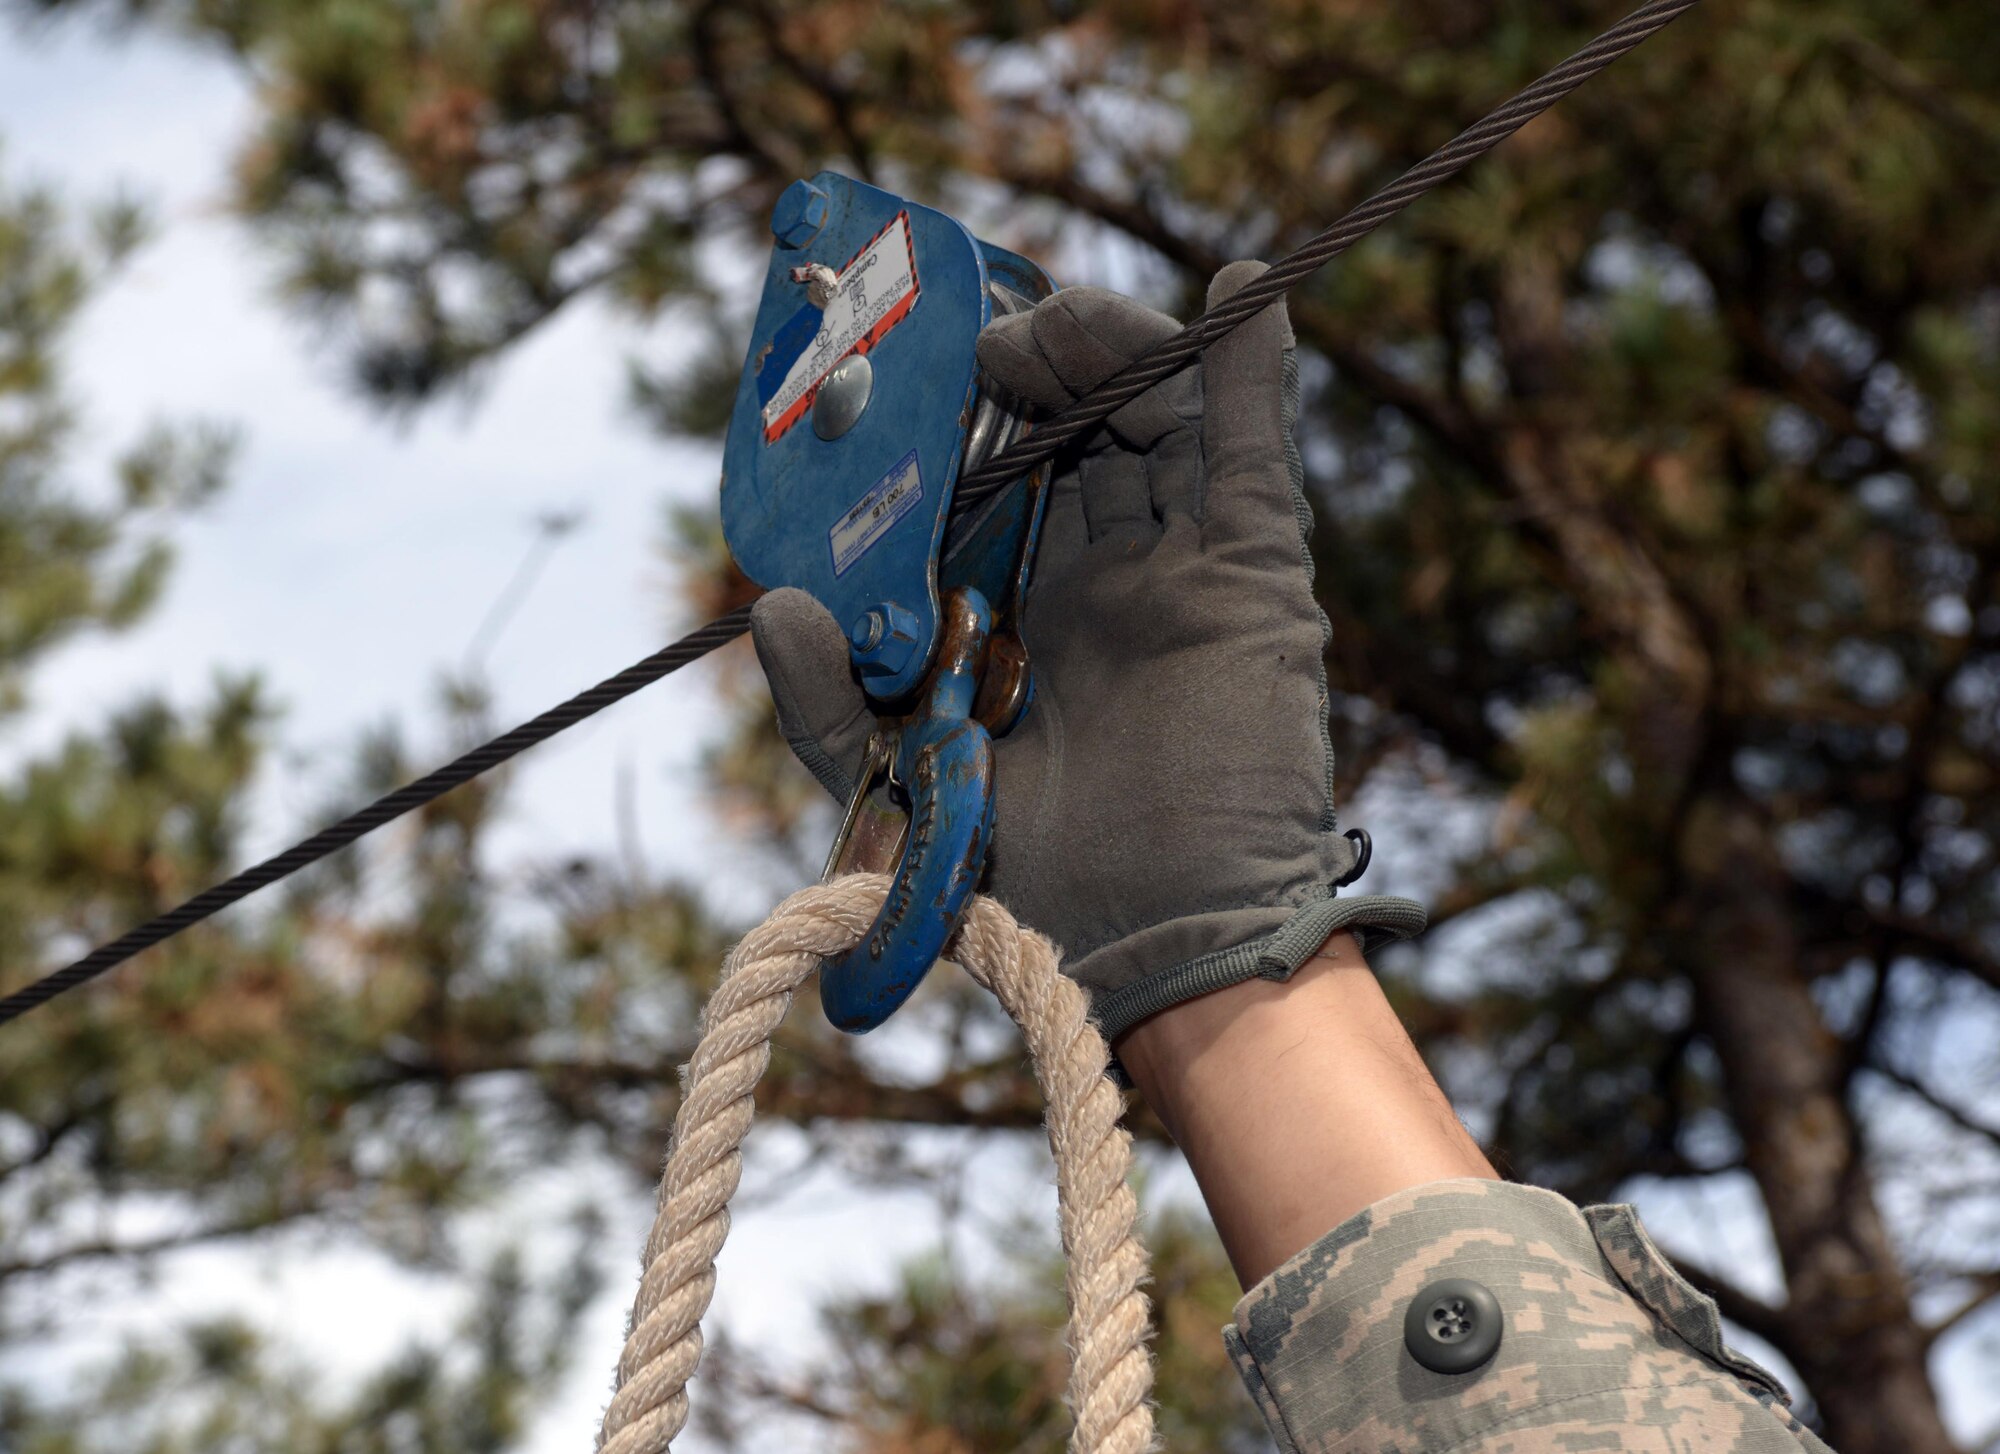 Master Sgt. Nathan Landry, the first sergeant assigned to the 28th Medical Group, fastens a rope for the next obstacle in the Leadership Reaction Course at the South Dakota National Guard West Camp Rapid training facility, Rapid City, S.D., Sept. 15, 2016. The zip line provided a means to transport equipment and personnel. Once the equipment was secured, participants hoisted themselves across in order to complete the obstacle. (U.S. Air Force photo by Airman 1st Class Donald C. Knechtel)